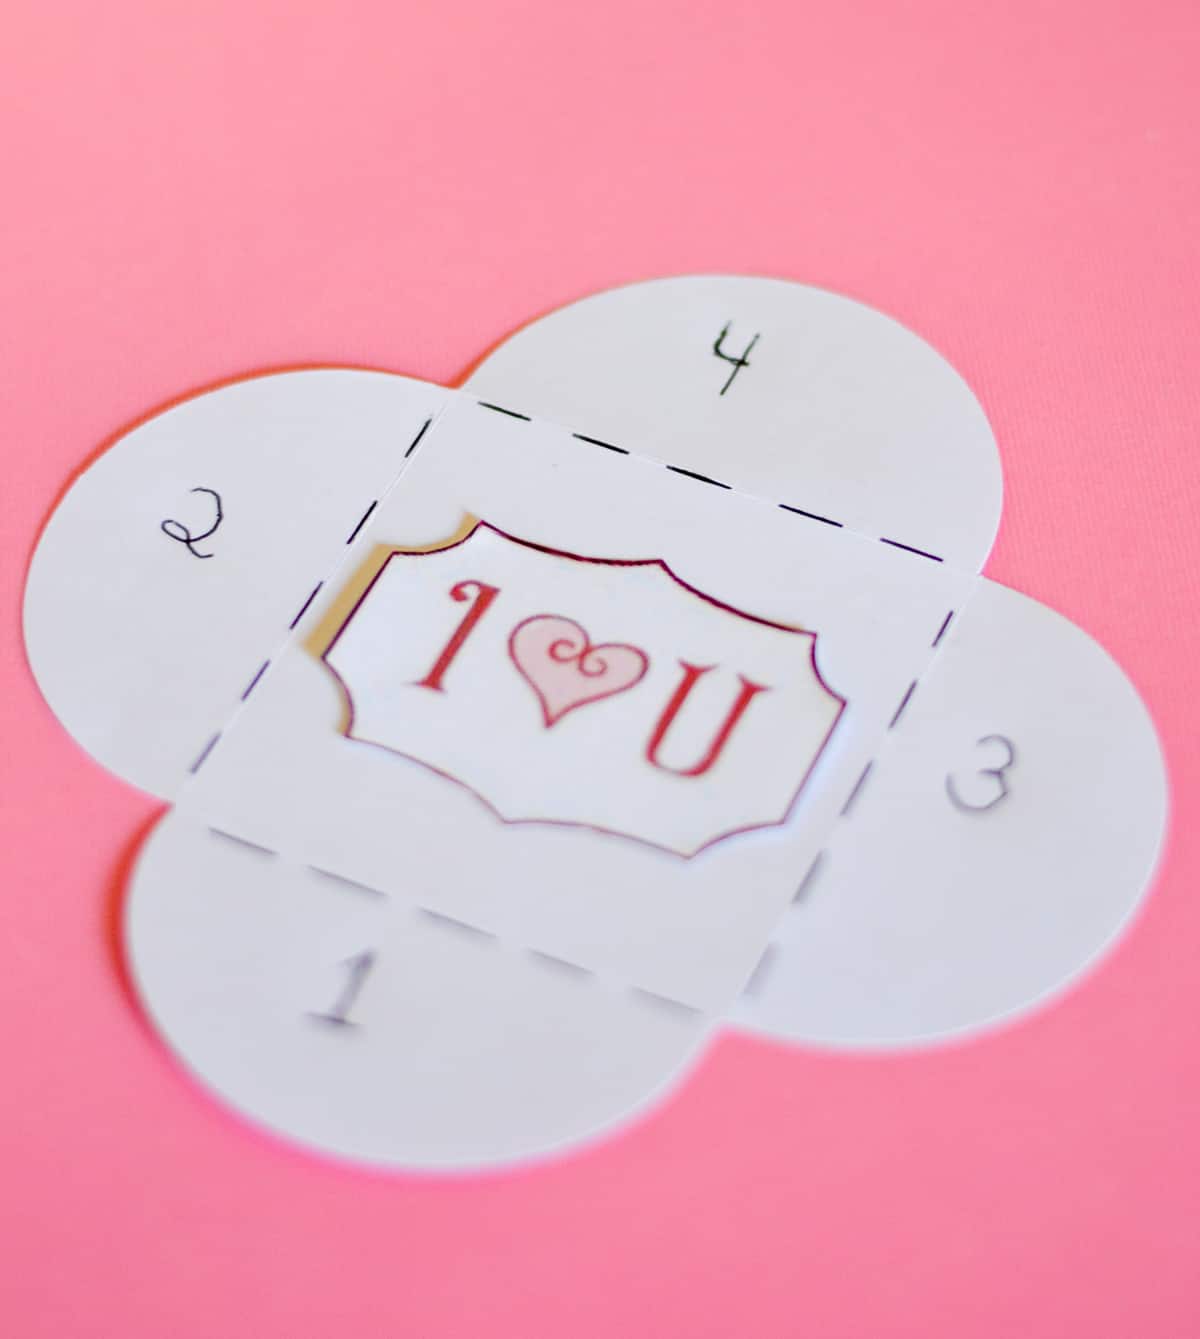 Picture of one of the steps for diy mini Valentine's Day cards made with scrapbook paper.